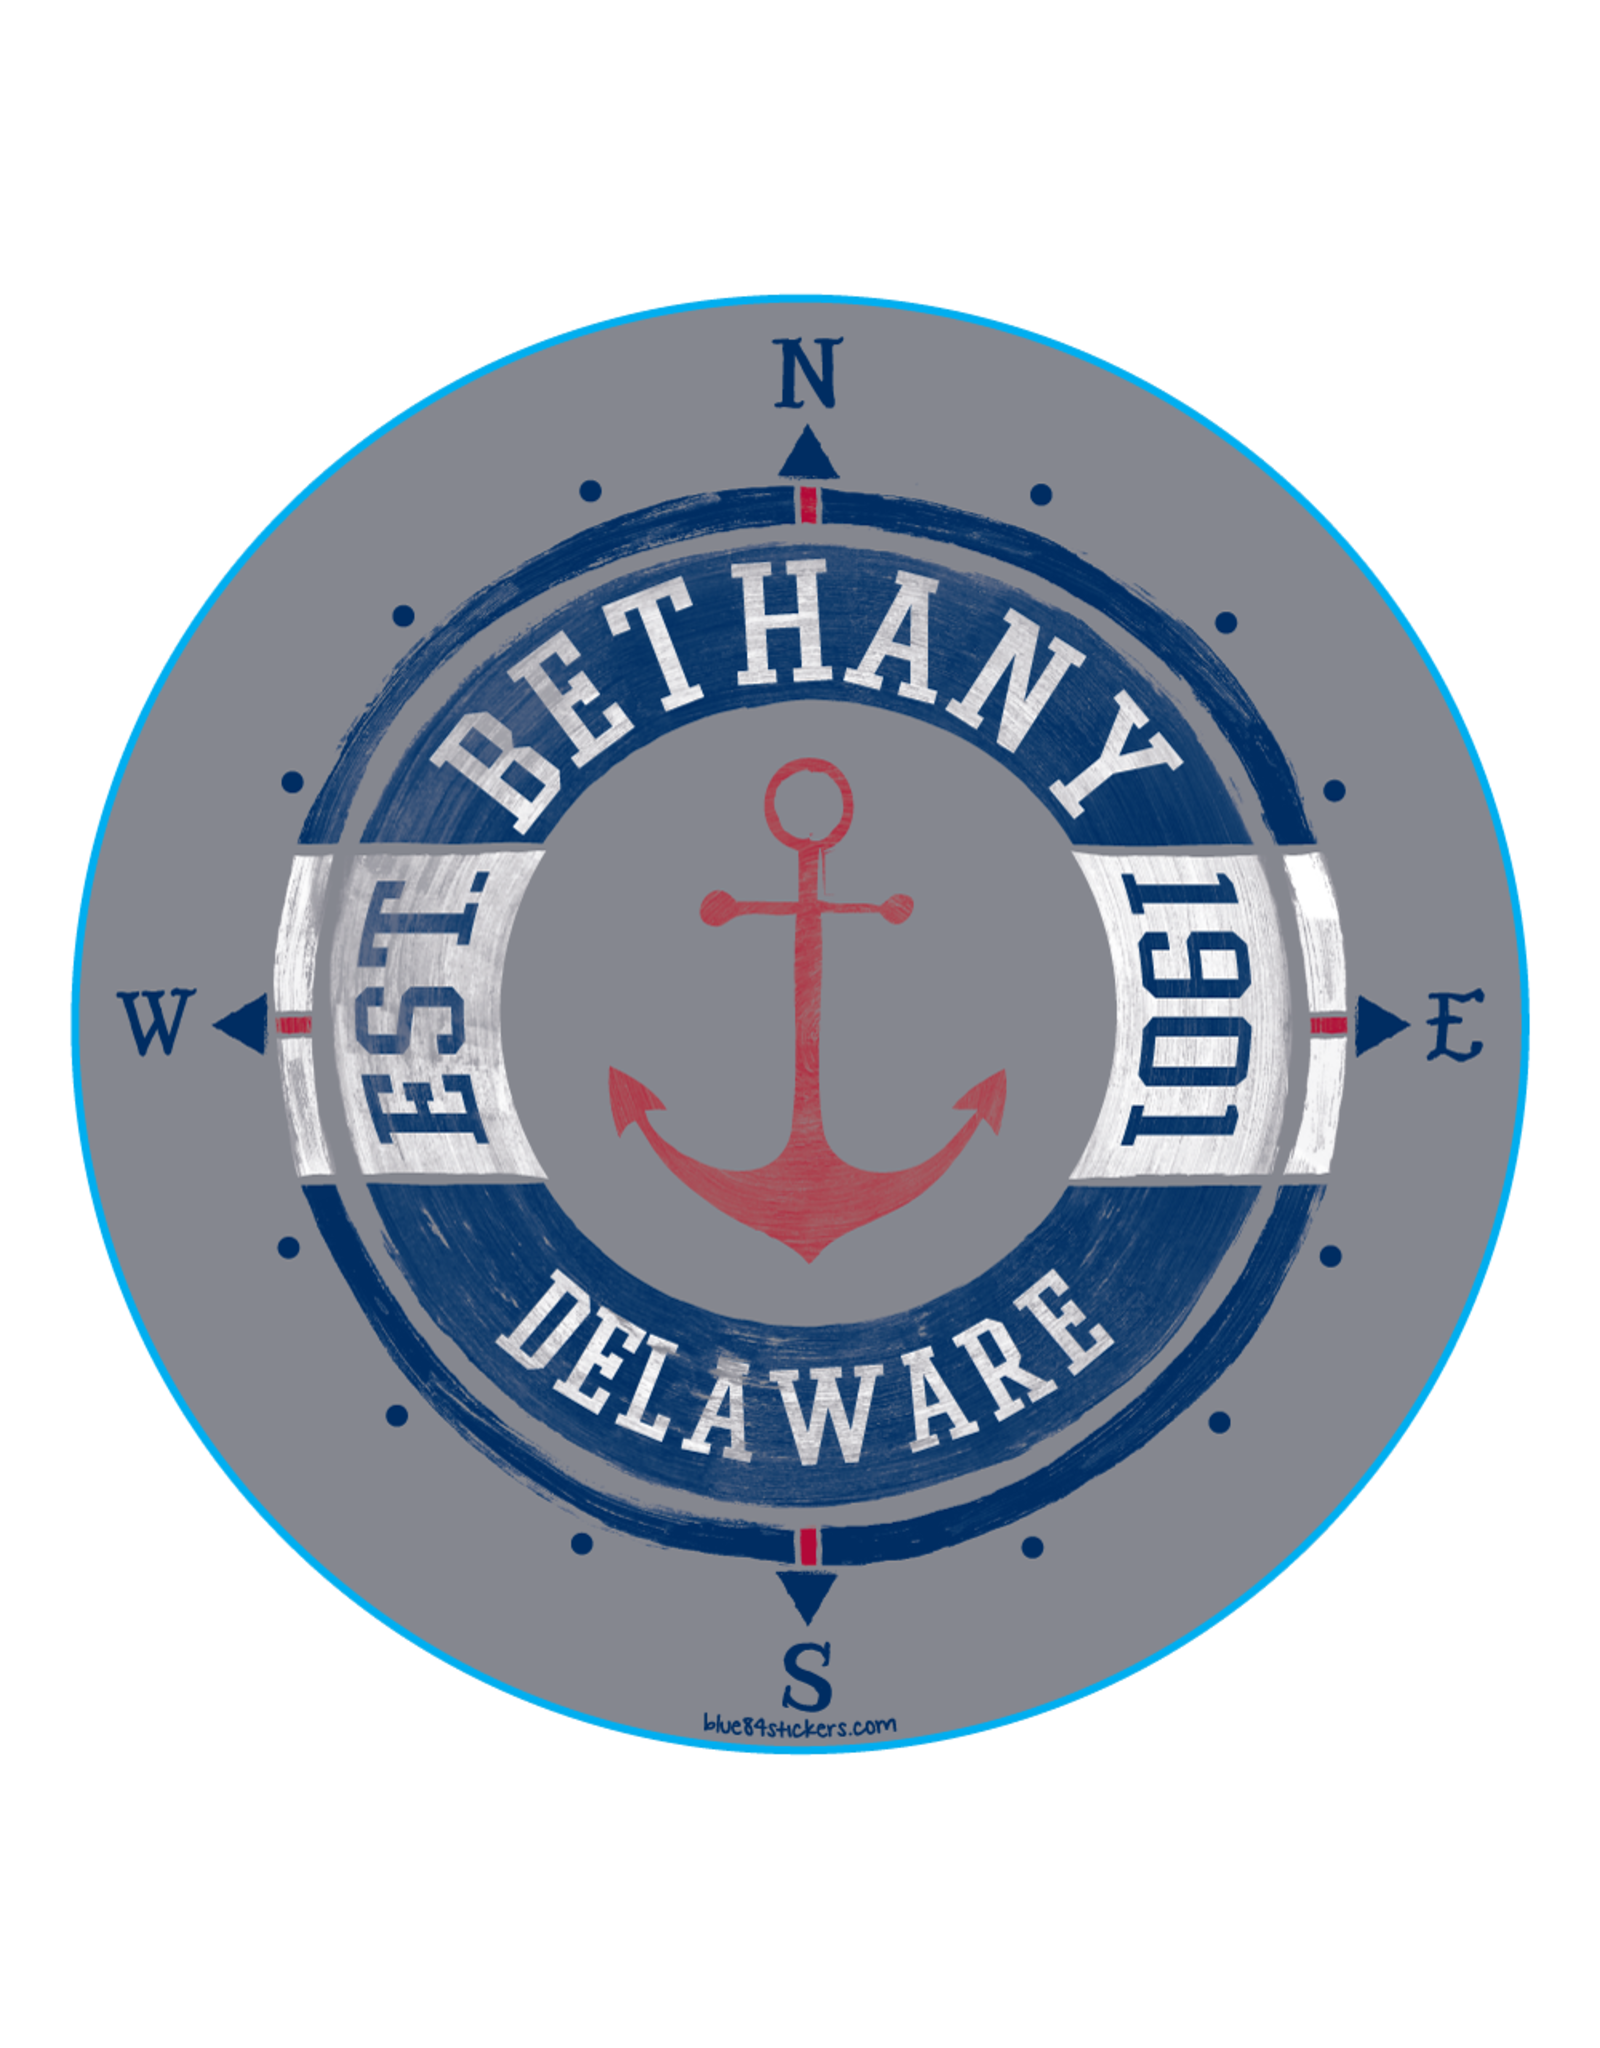 BLUE 84 BETHANY BEACH STICKER PROVERBIAL ANCHOR